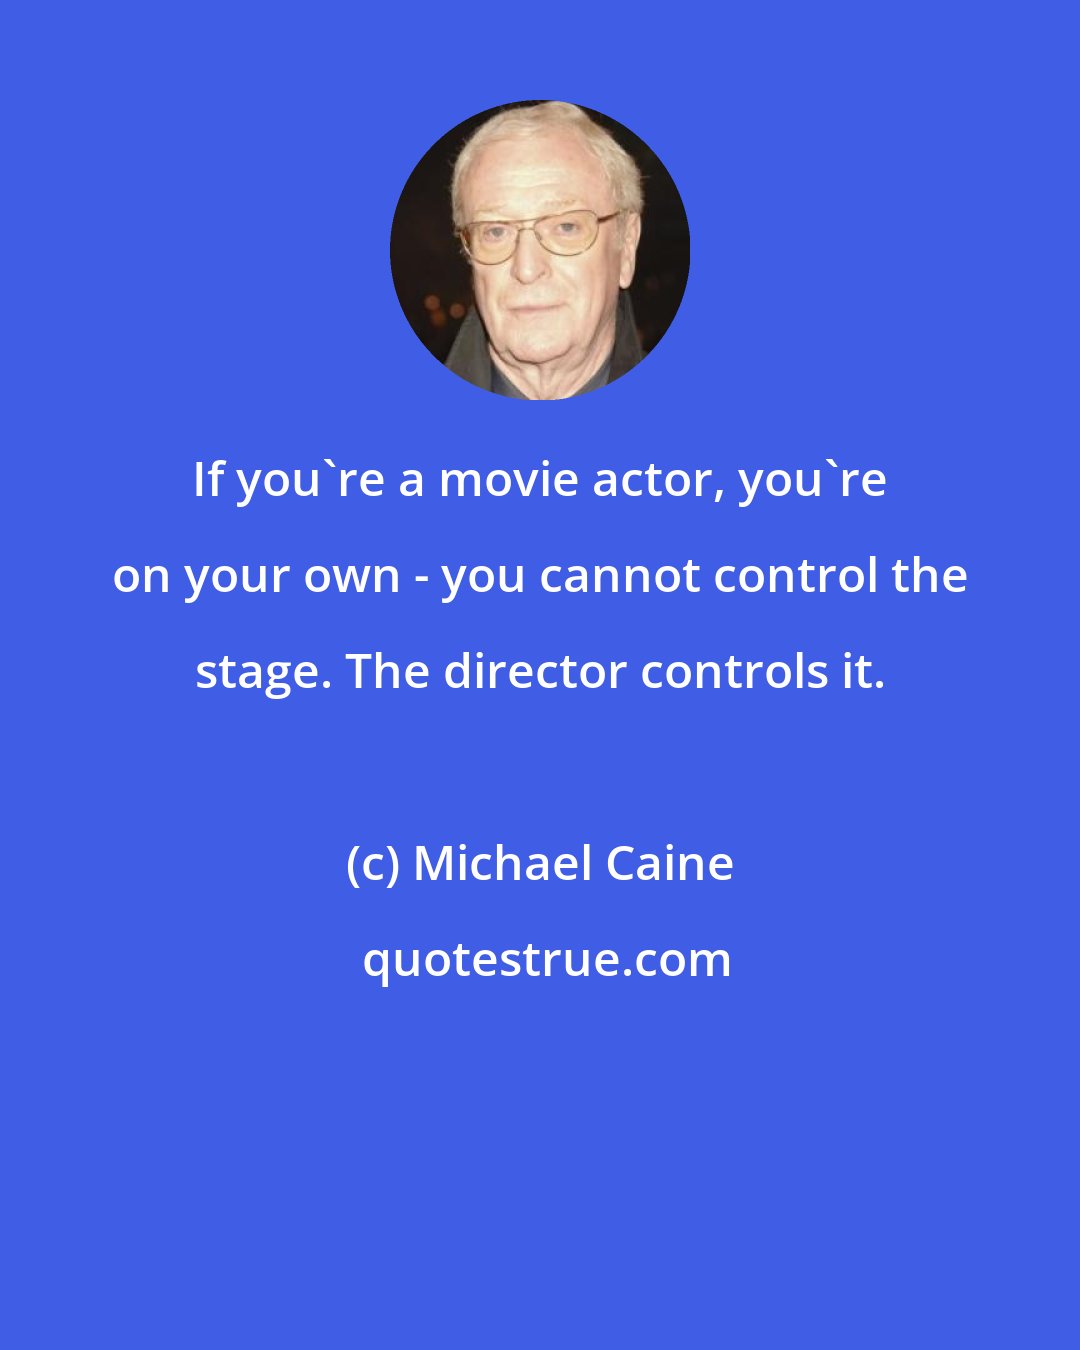 Michael Caine: If you're a movie actor, you're on your own - you cannot control the stage. The director controls it.